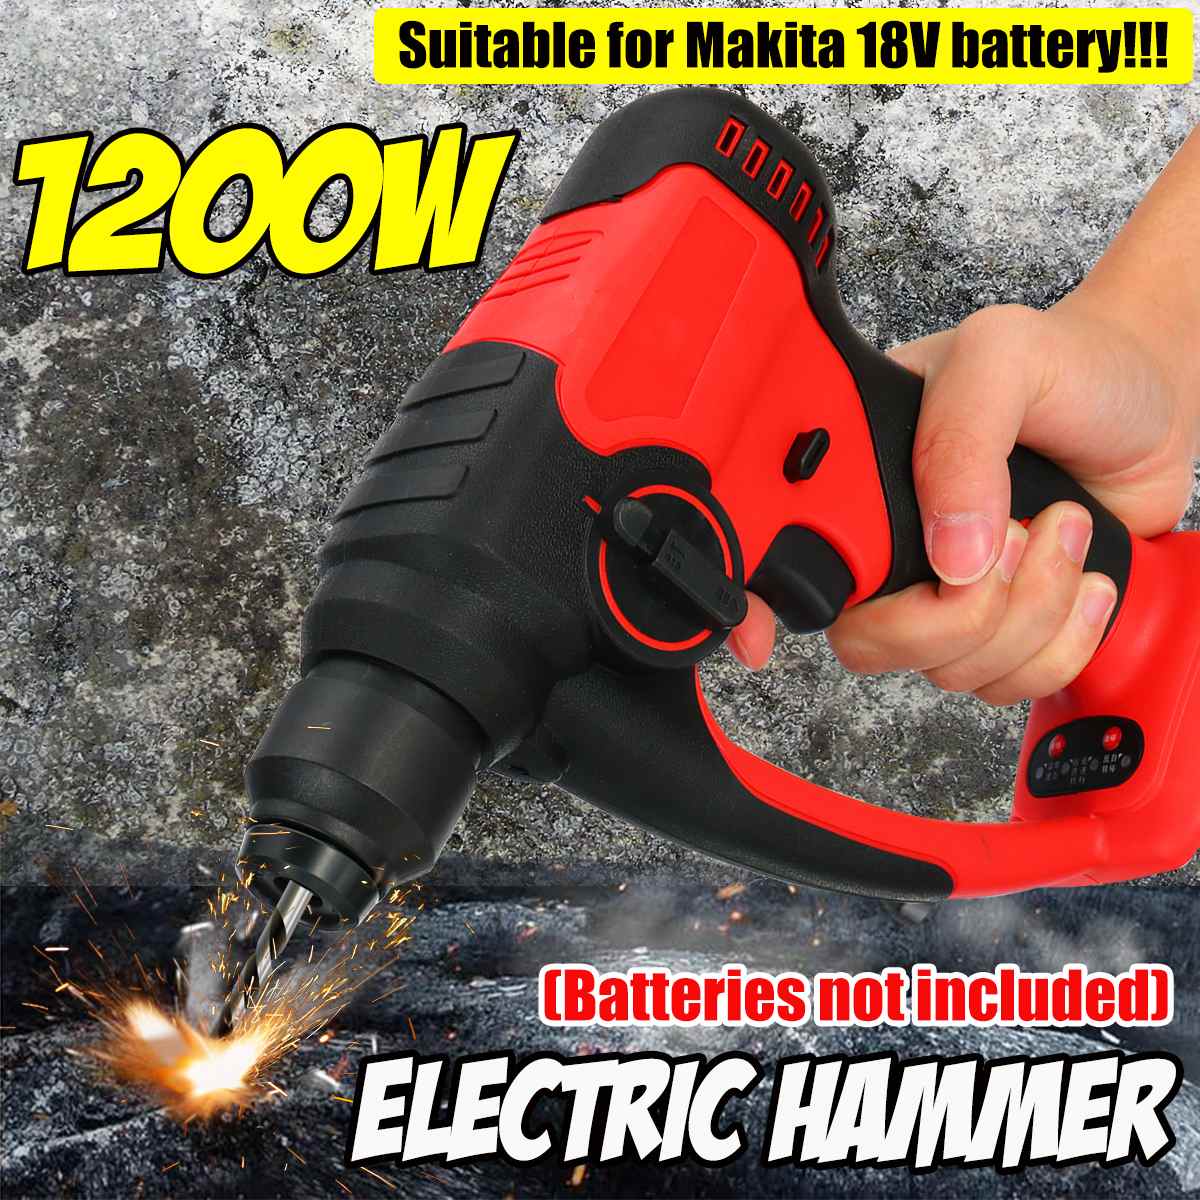 Brushless Cordless Rotary Rechargeable Hammer Drill Electric Demolition Hammer Power Impact Drill Adapted For Makita Battery